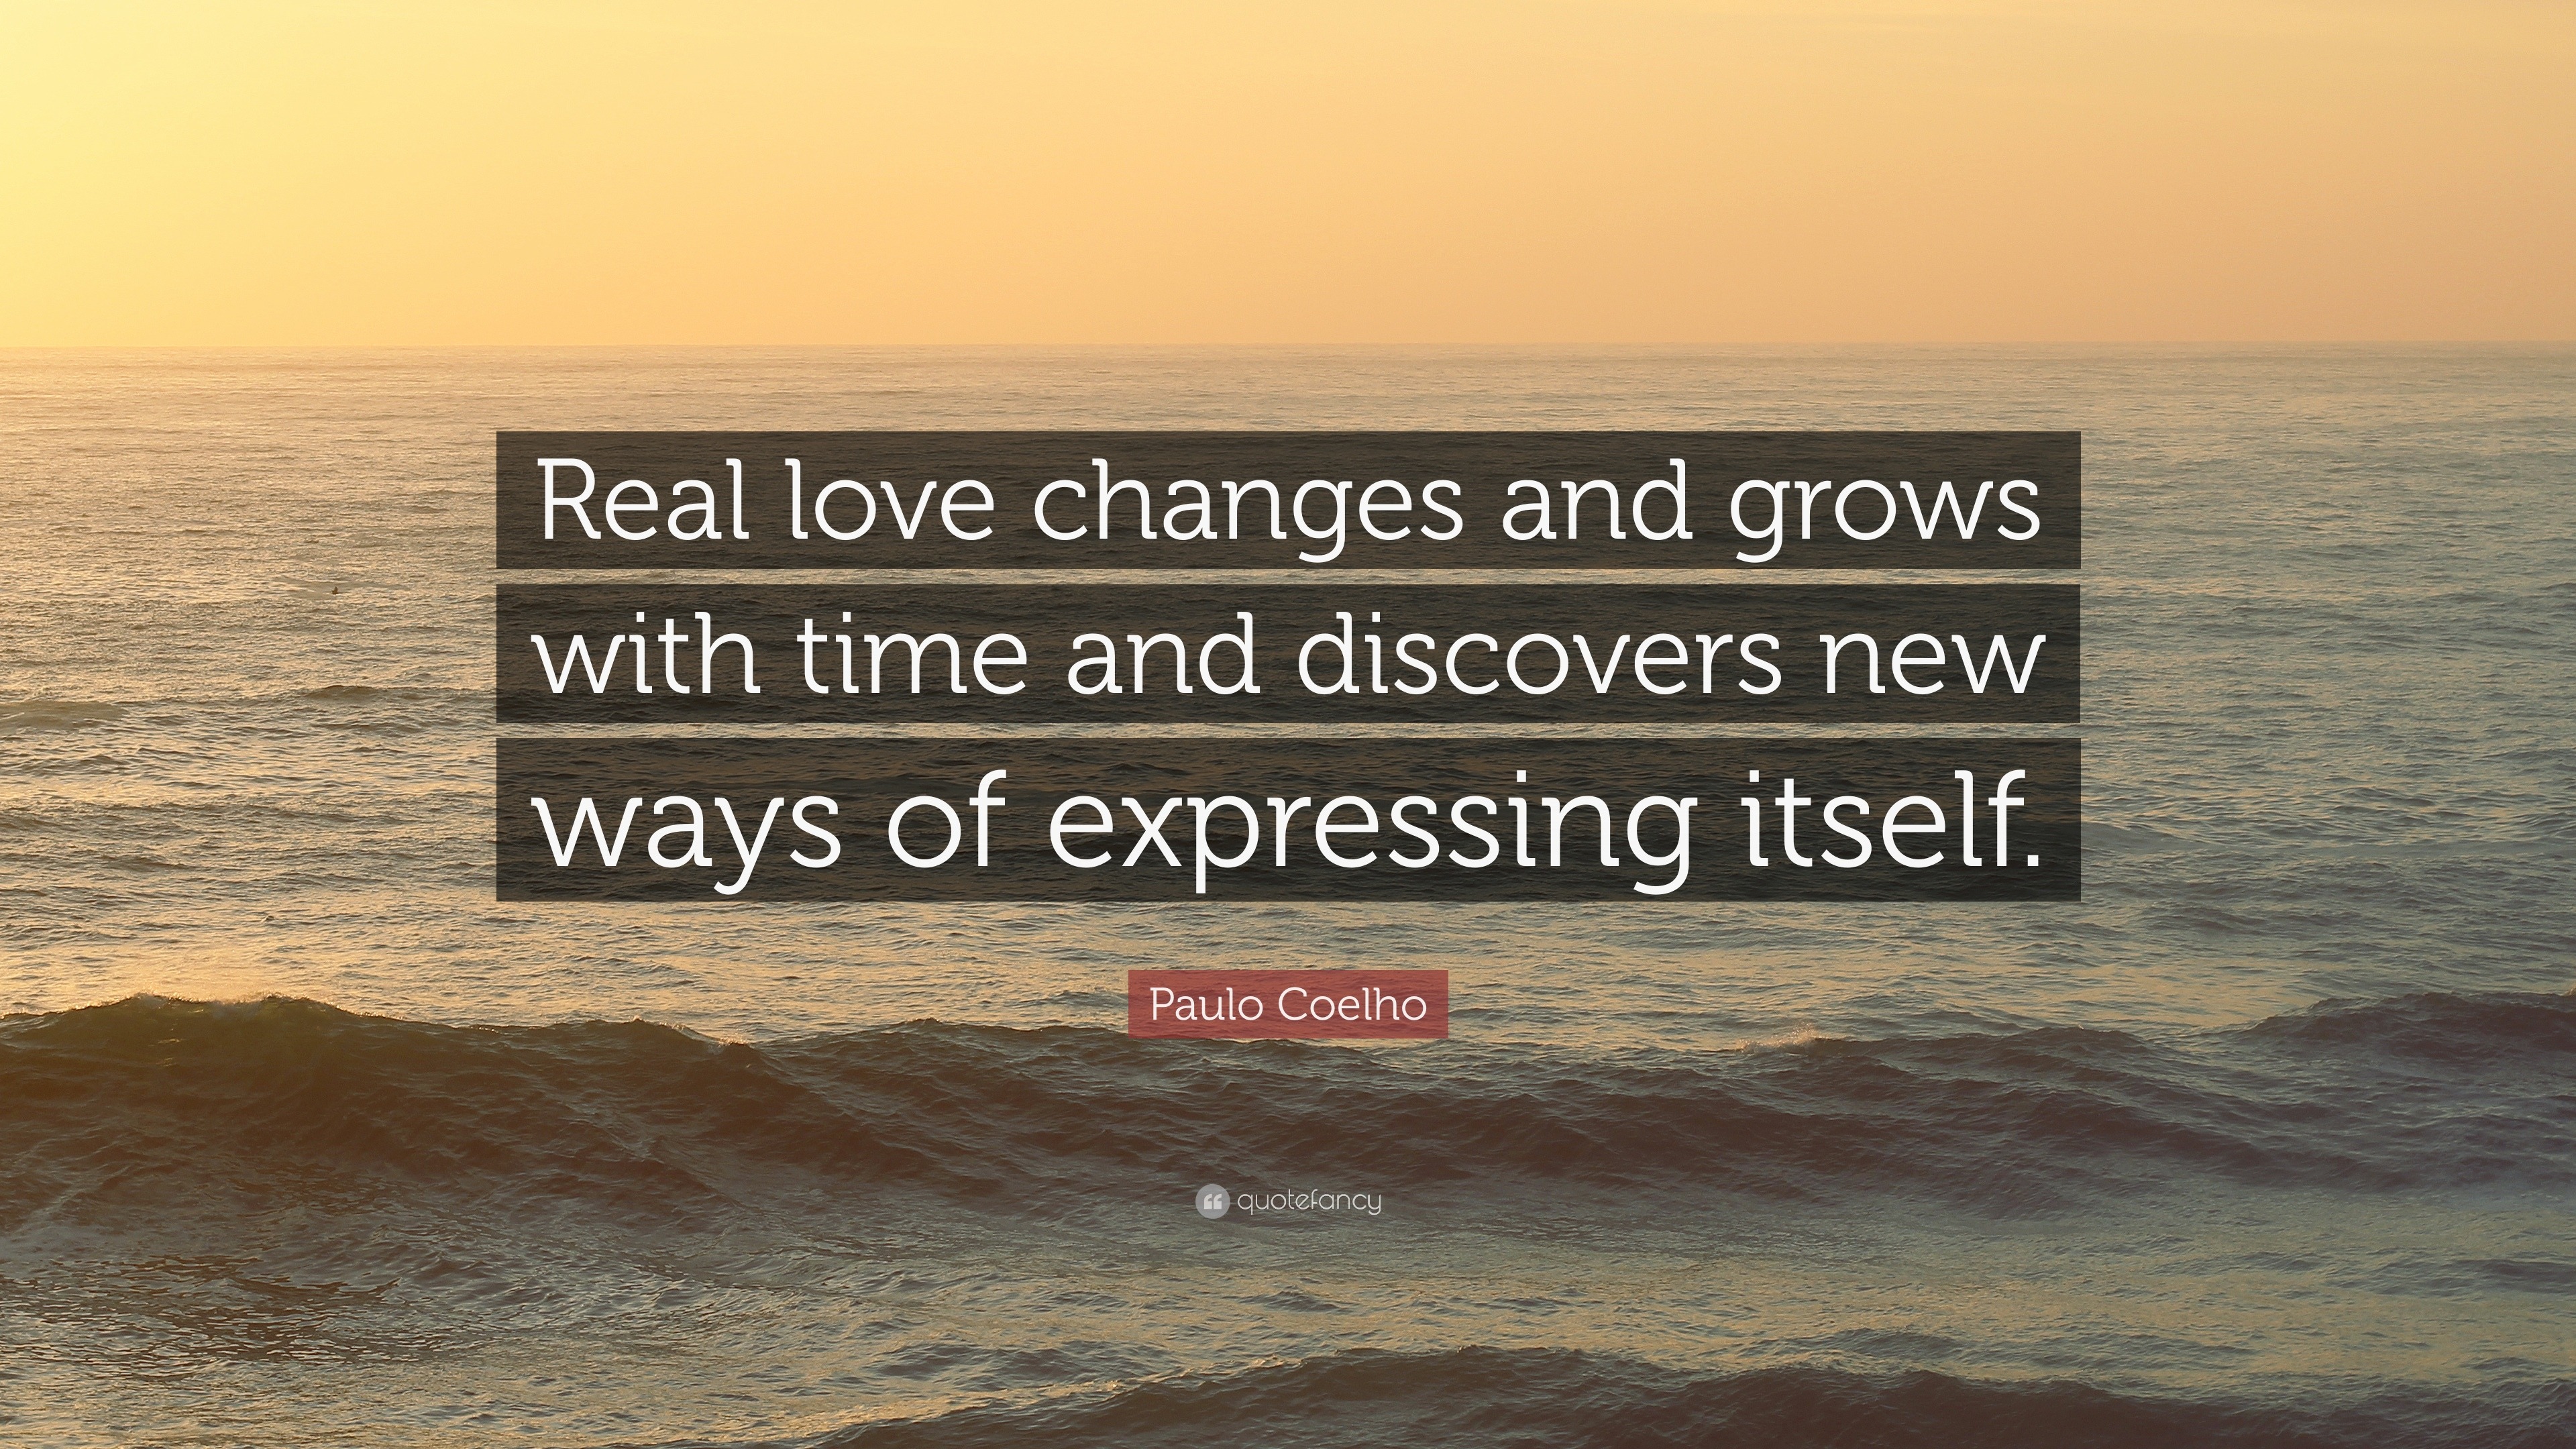 Luxury Love Grows with Time Quotes